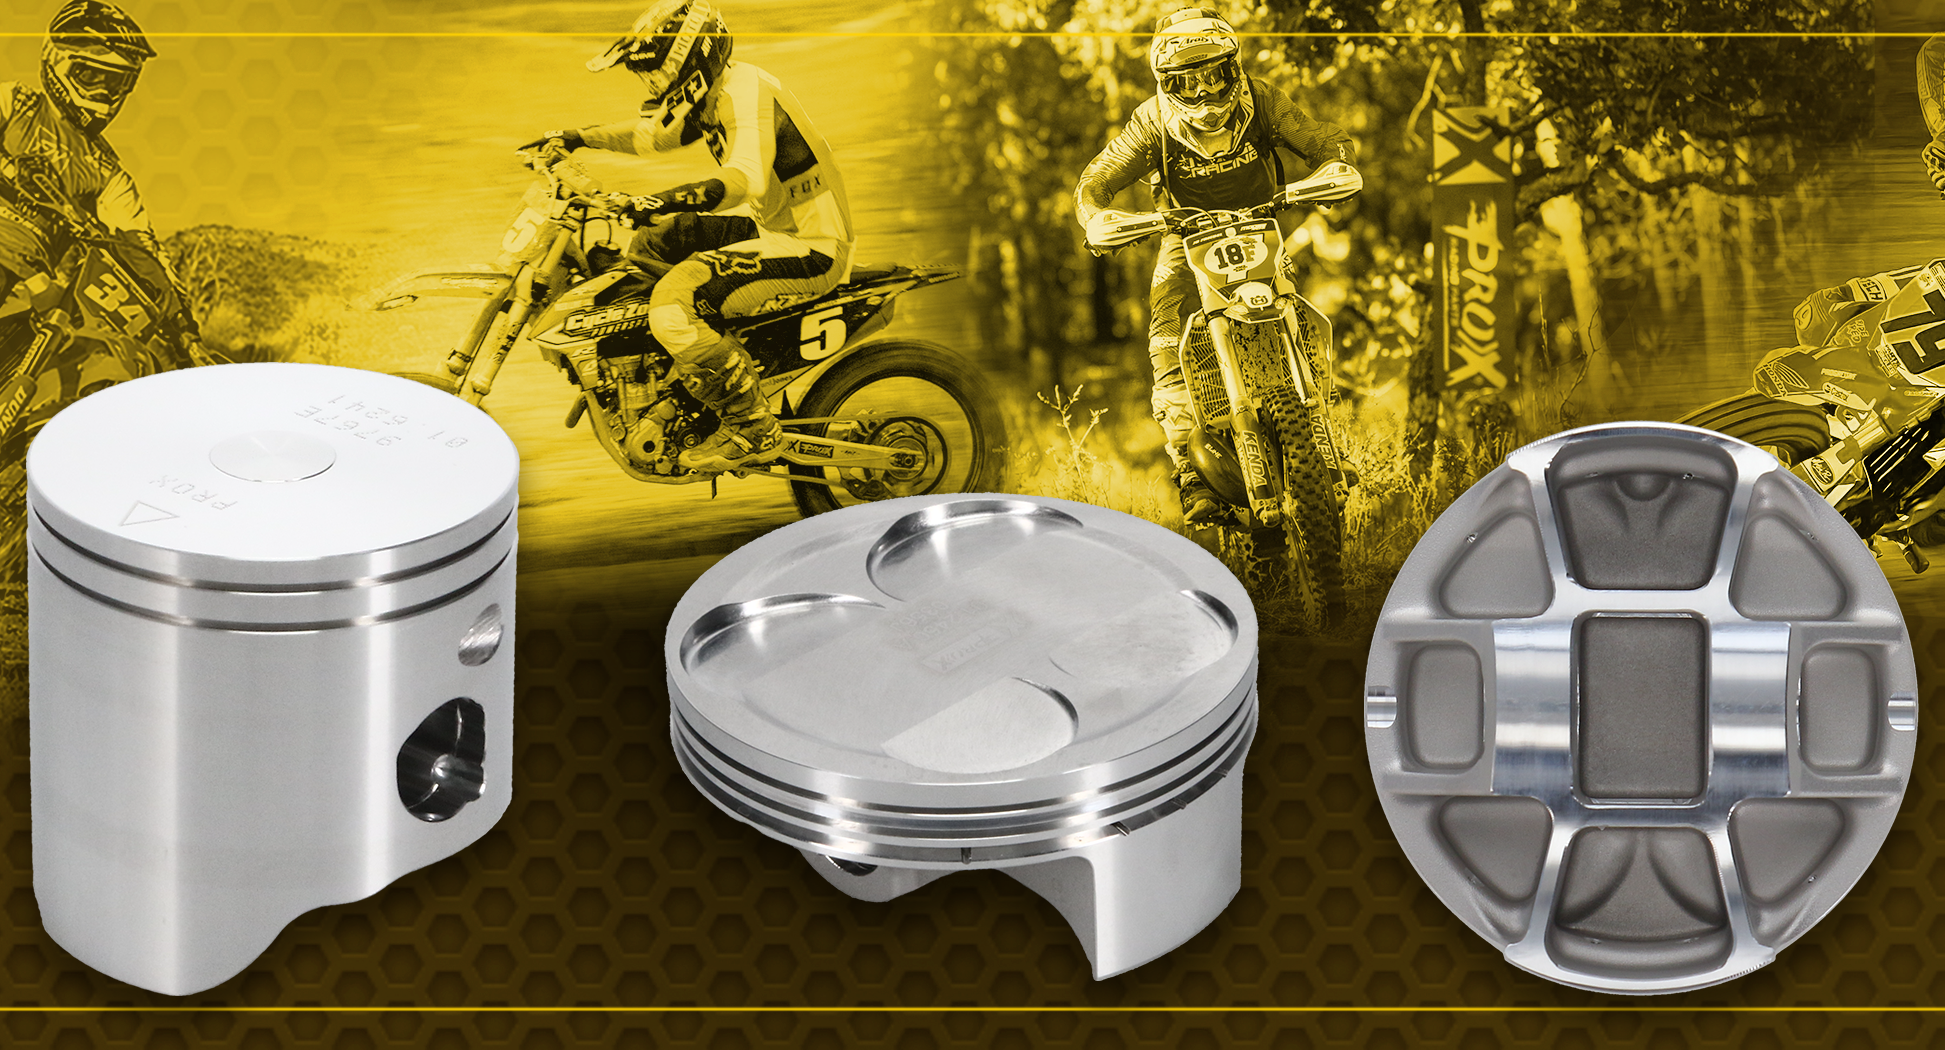 MX and off-road pistons ProX